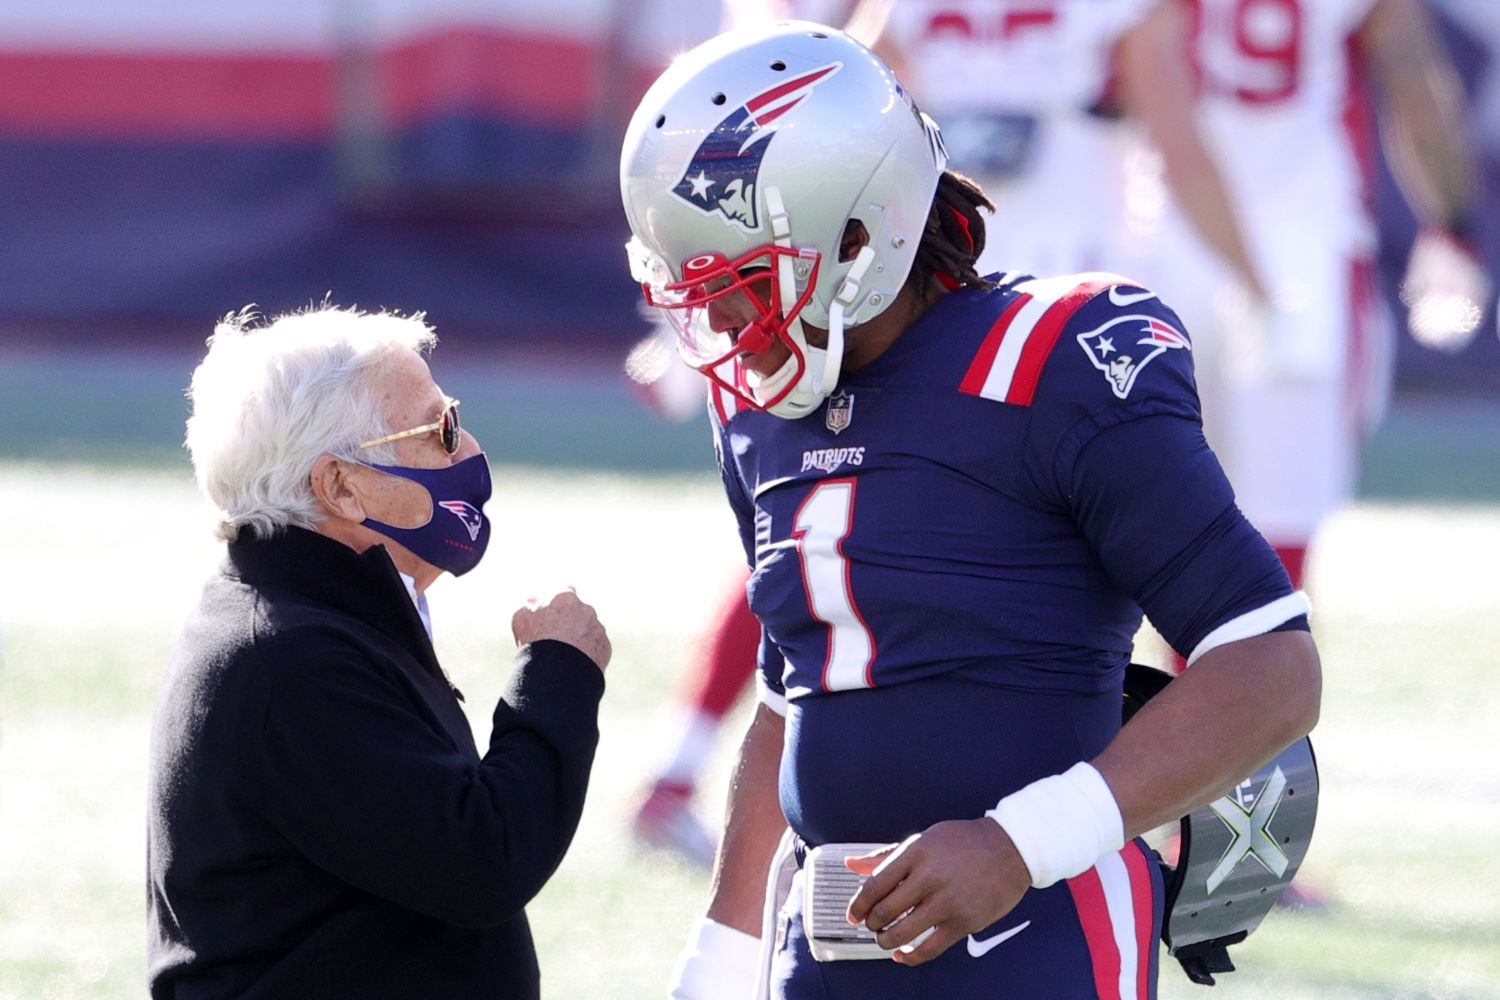 Cam Newton has forced Bill Belichick to make a franchise-altering decision. Will the Patriots make a change at the quarterback position?